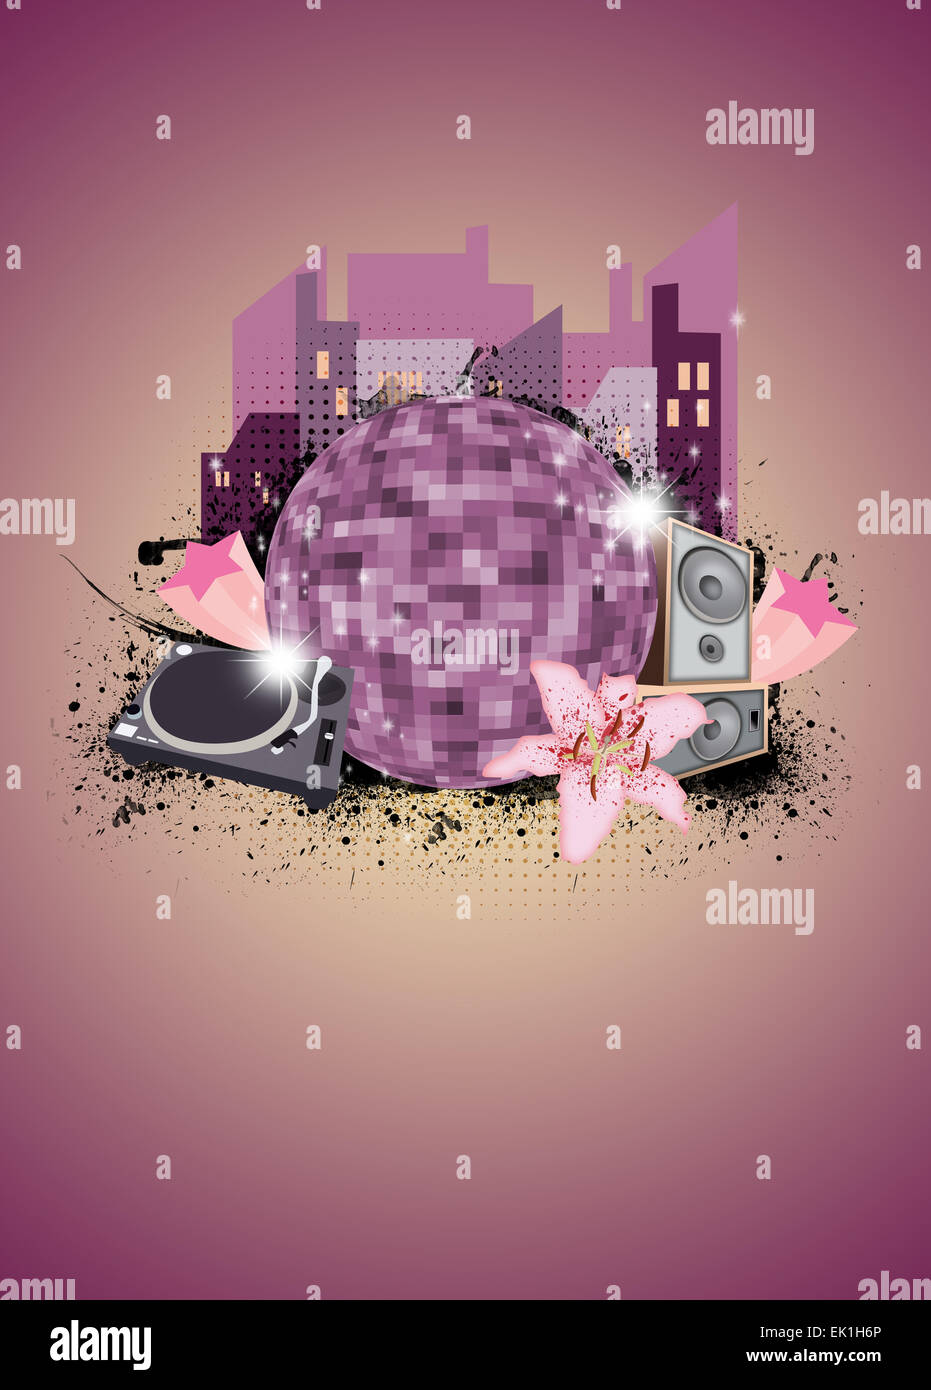 City Music Party Poster Or Flyer Background With Space Stock Photo Alamy